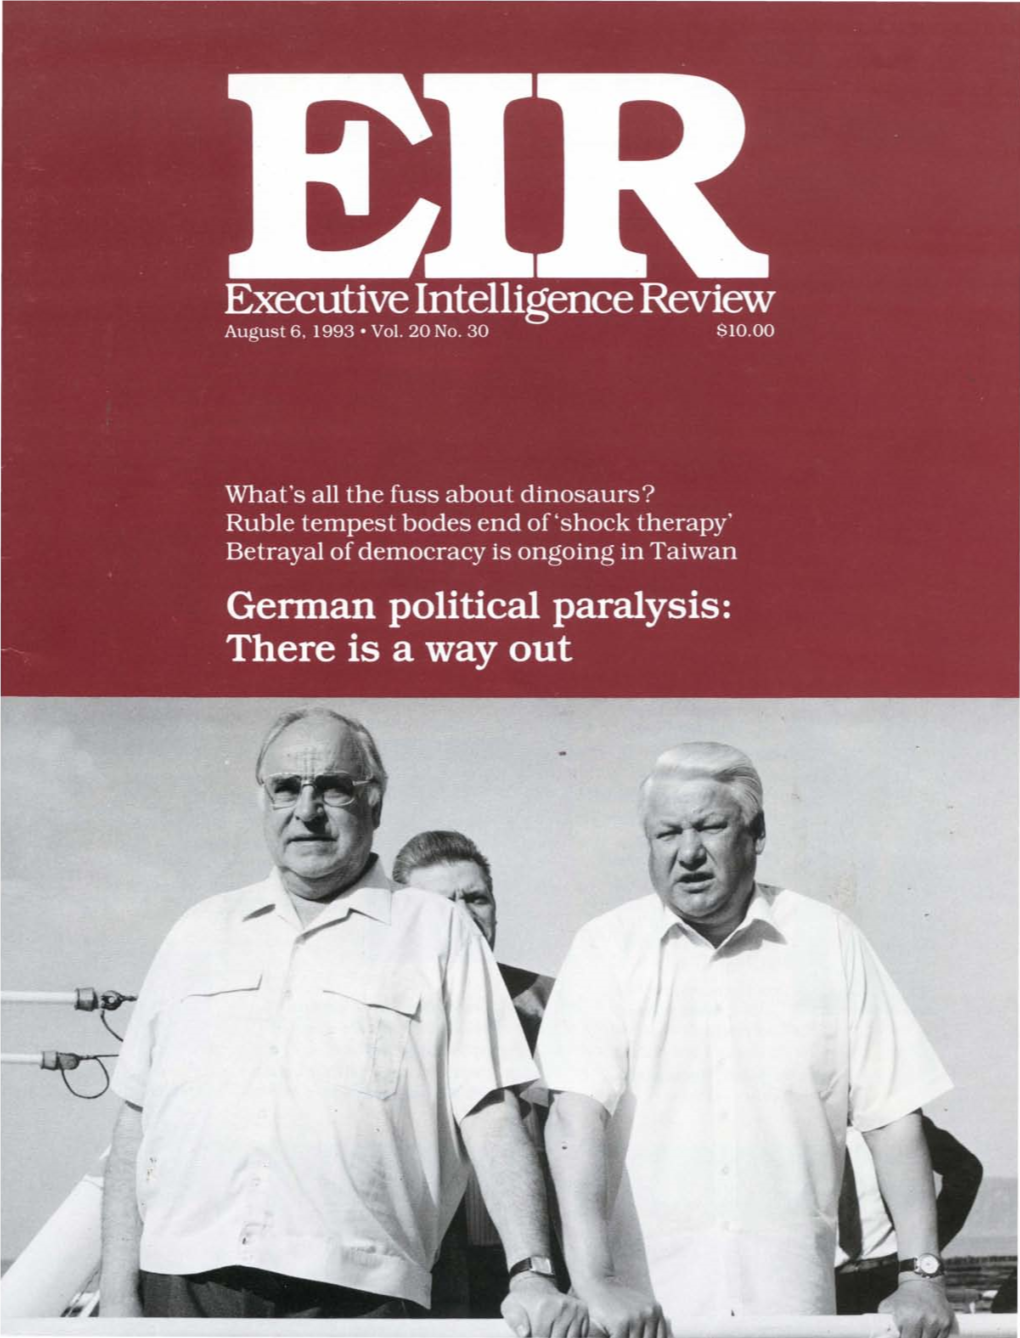 Executive Intelligence Review, Volume 20, Number 30, August 6, 1993